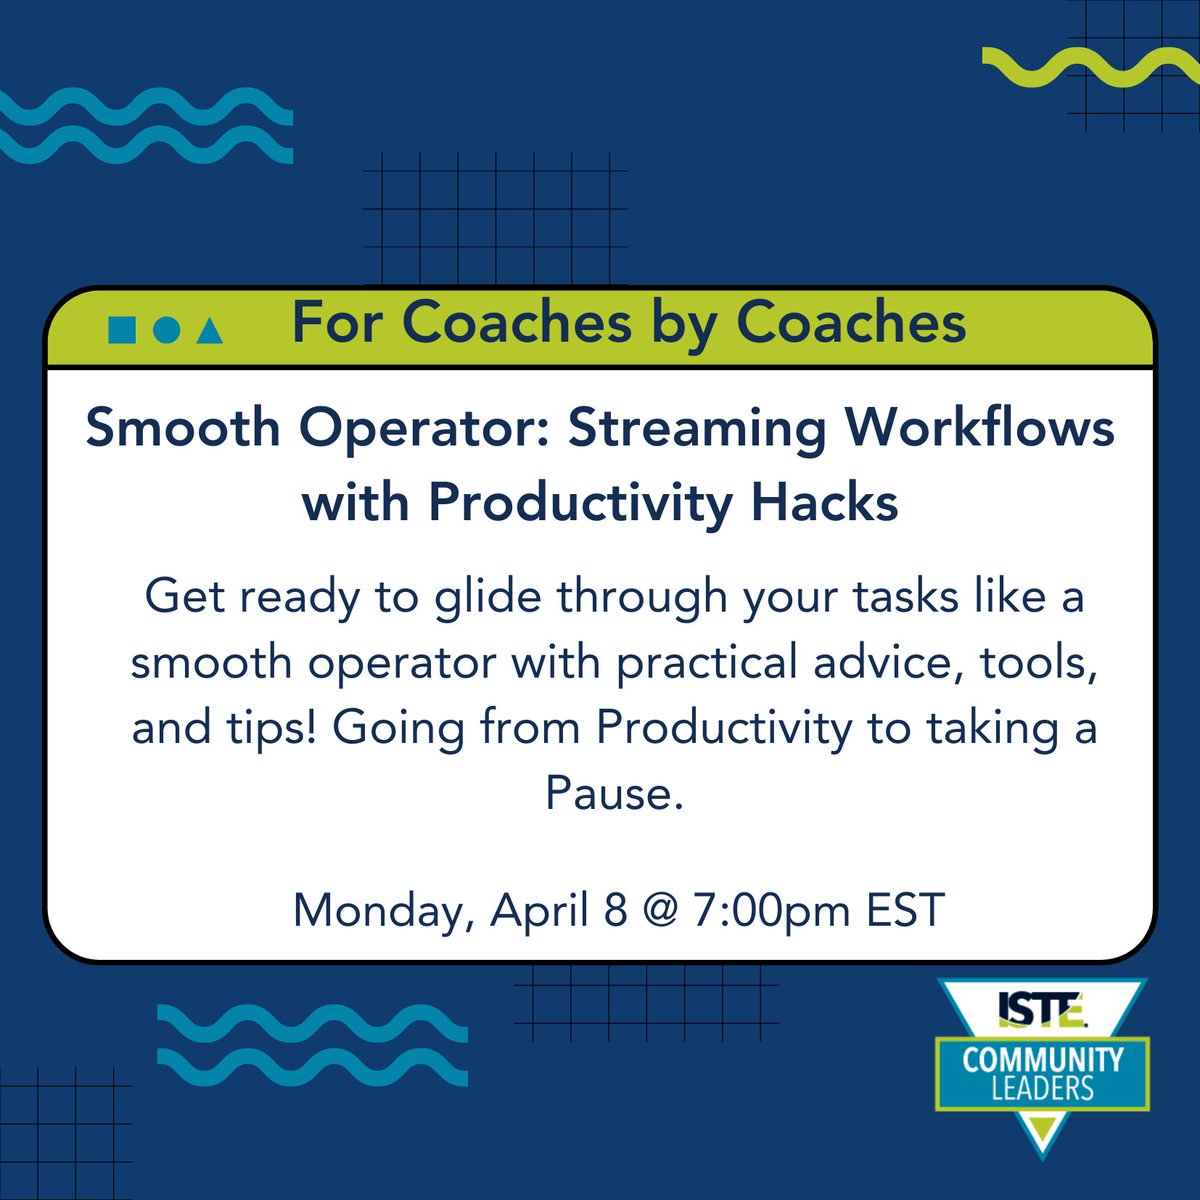 Join@ISTECommunity Leaders for the #Coaches meetup on Monday, April 8 at 7pm EST for productivity tips and how to be a smooth operator with @Rosalyn_Teach & @PFerris_Coach! 📷Register here: bit.ly/ISTECoachAPR